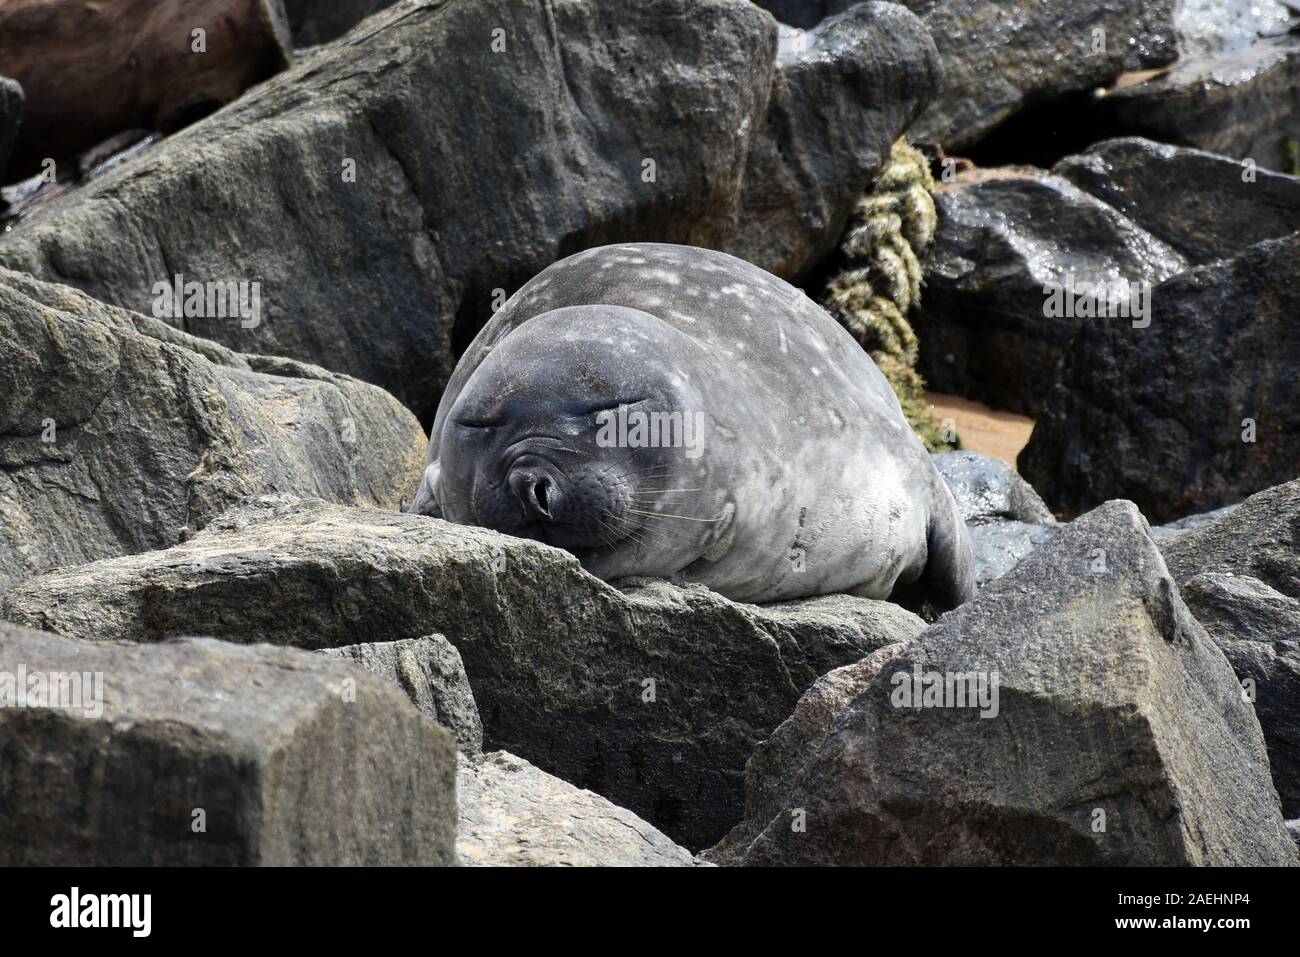 Colombo, Sri Lanka. 9th Dec 2019.  A southern elephant seal is seen in the coastal area of capital Colombo in Sri Lanka, Dec. 9, 2019. A southern elephant seal was spotted for the first time in Sri Lankan waters and has attracted many locals as it swarmed off the coast of capital Colombo searching for a place to haul, local media reports said. The seal was first spotted in the southern waters of Sri lanka, off the tourist town of Unawatuna, located about 144 km from capital Colombo in mid November. Credit: Xinhua/Alamy Live News Stock Photo